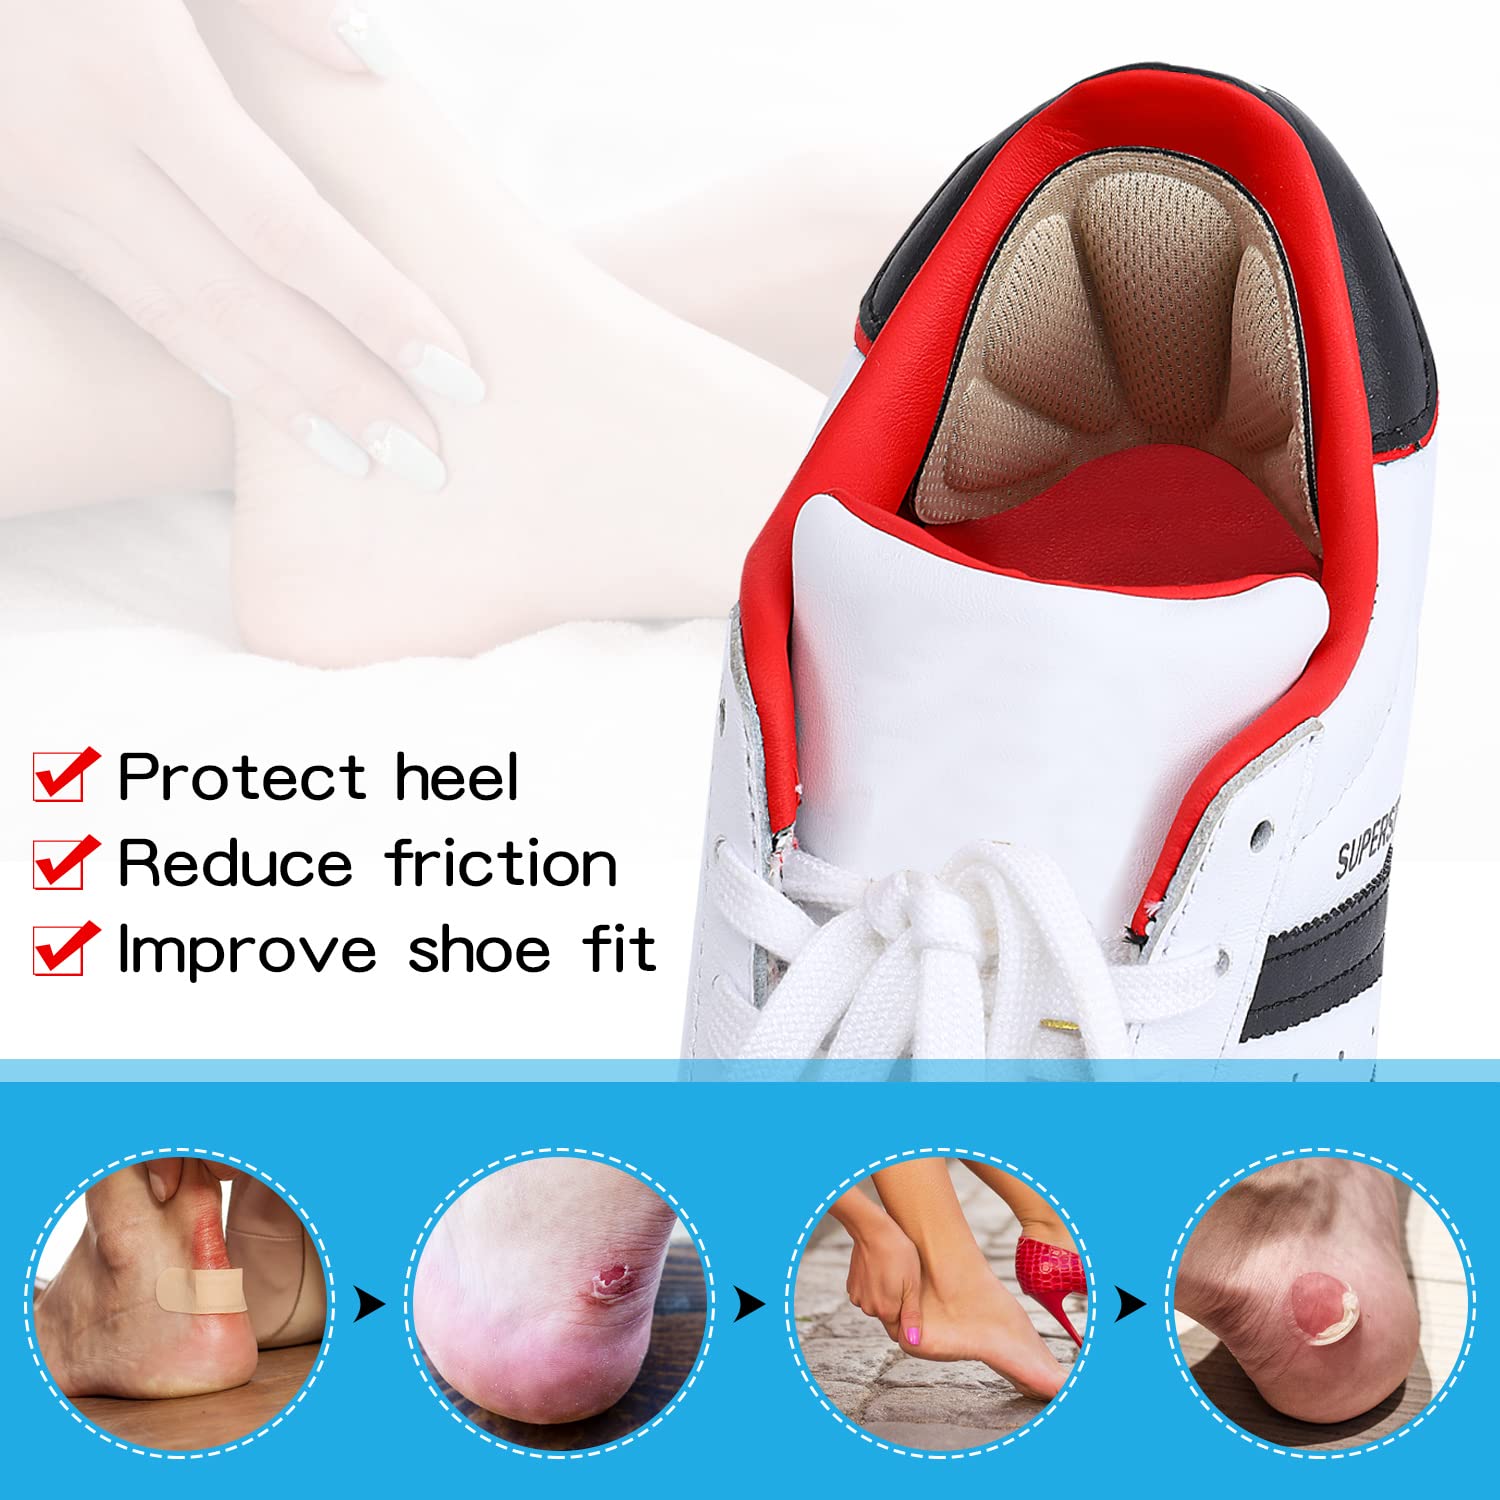 Huethy Back of Heel Cushion Inserts, Mesh Grips Pads for Boots, Loose Shoes Too Big, Reusable Adhesive Heel Guards Liners for Women Men, Improve Shoe Fit, 4PCS-Beige